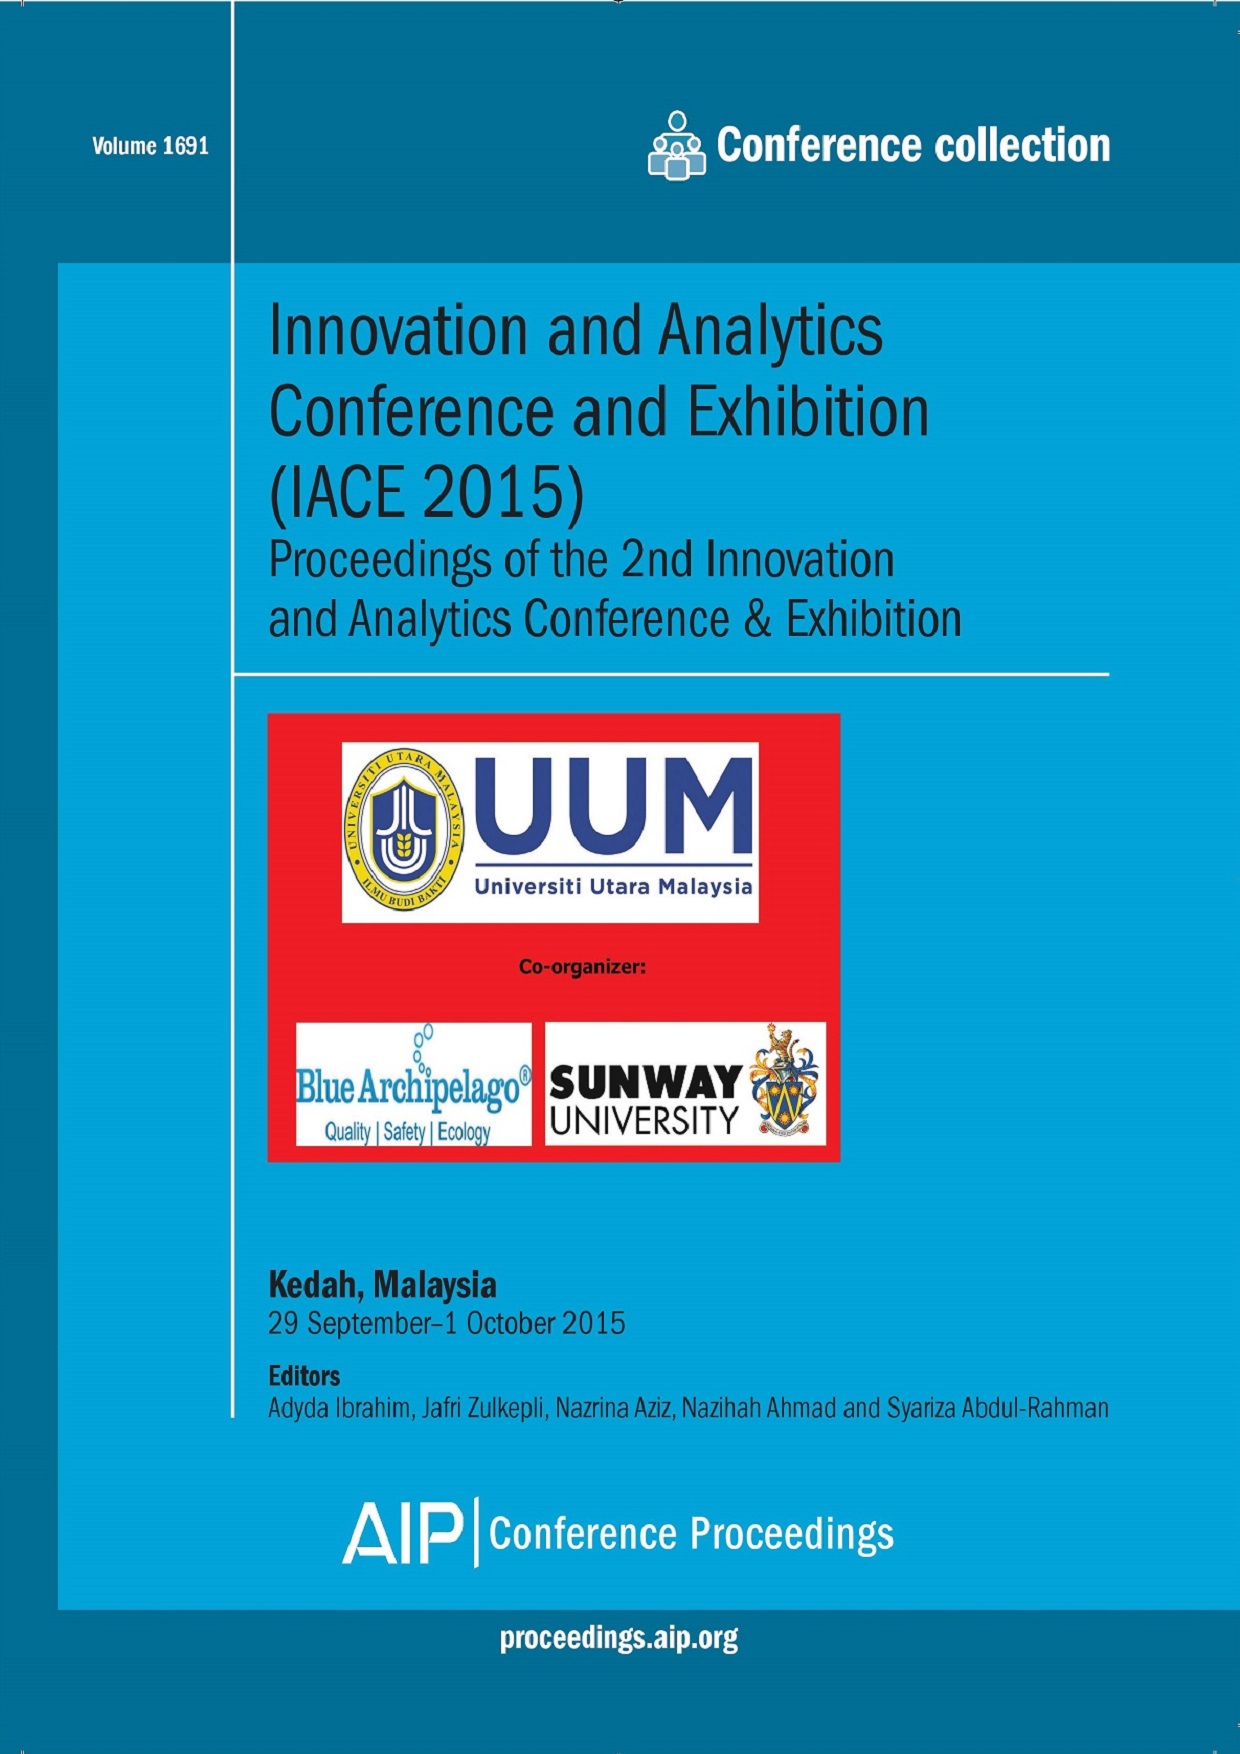 Proceedings of the Innovation and Analytics Conference & Exhibition (IACE) 2015